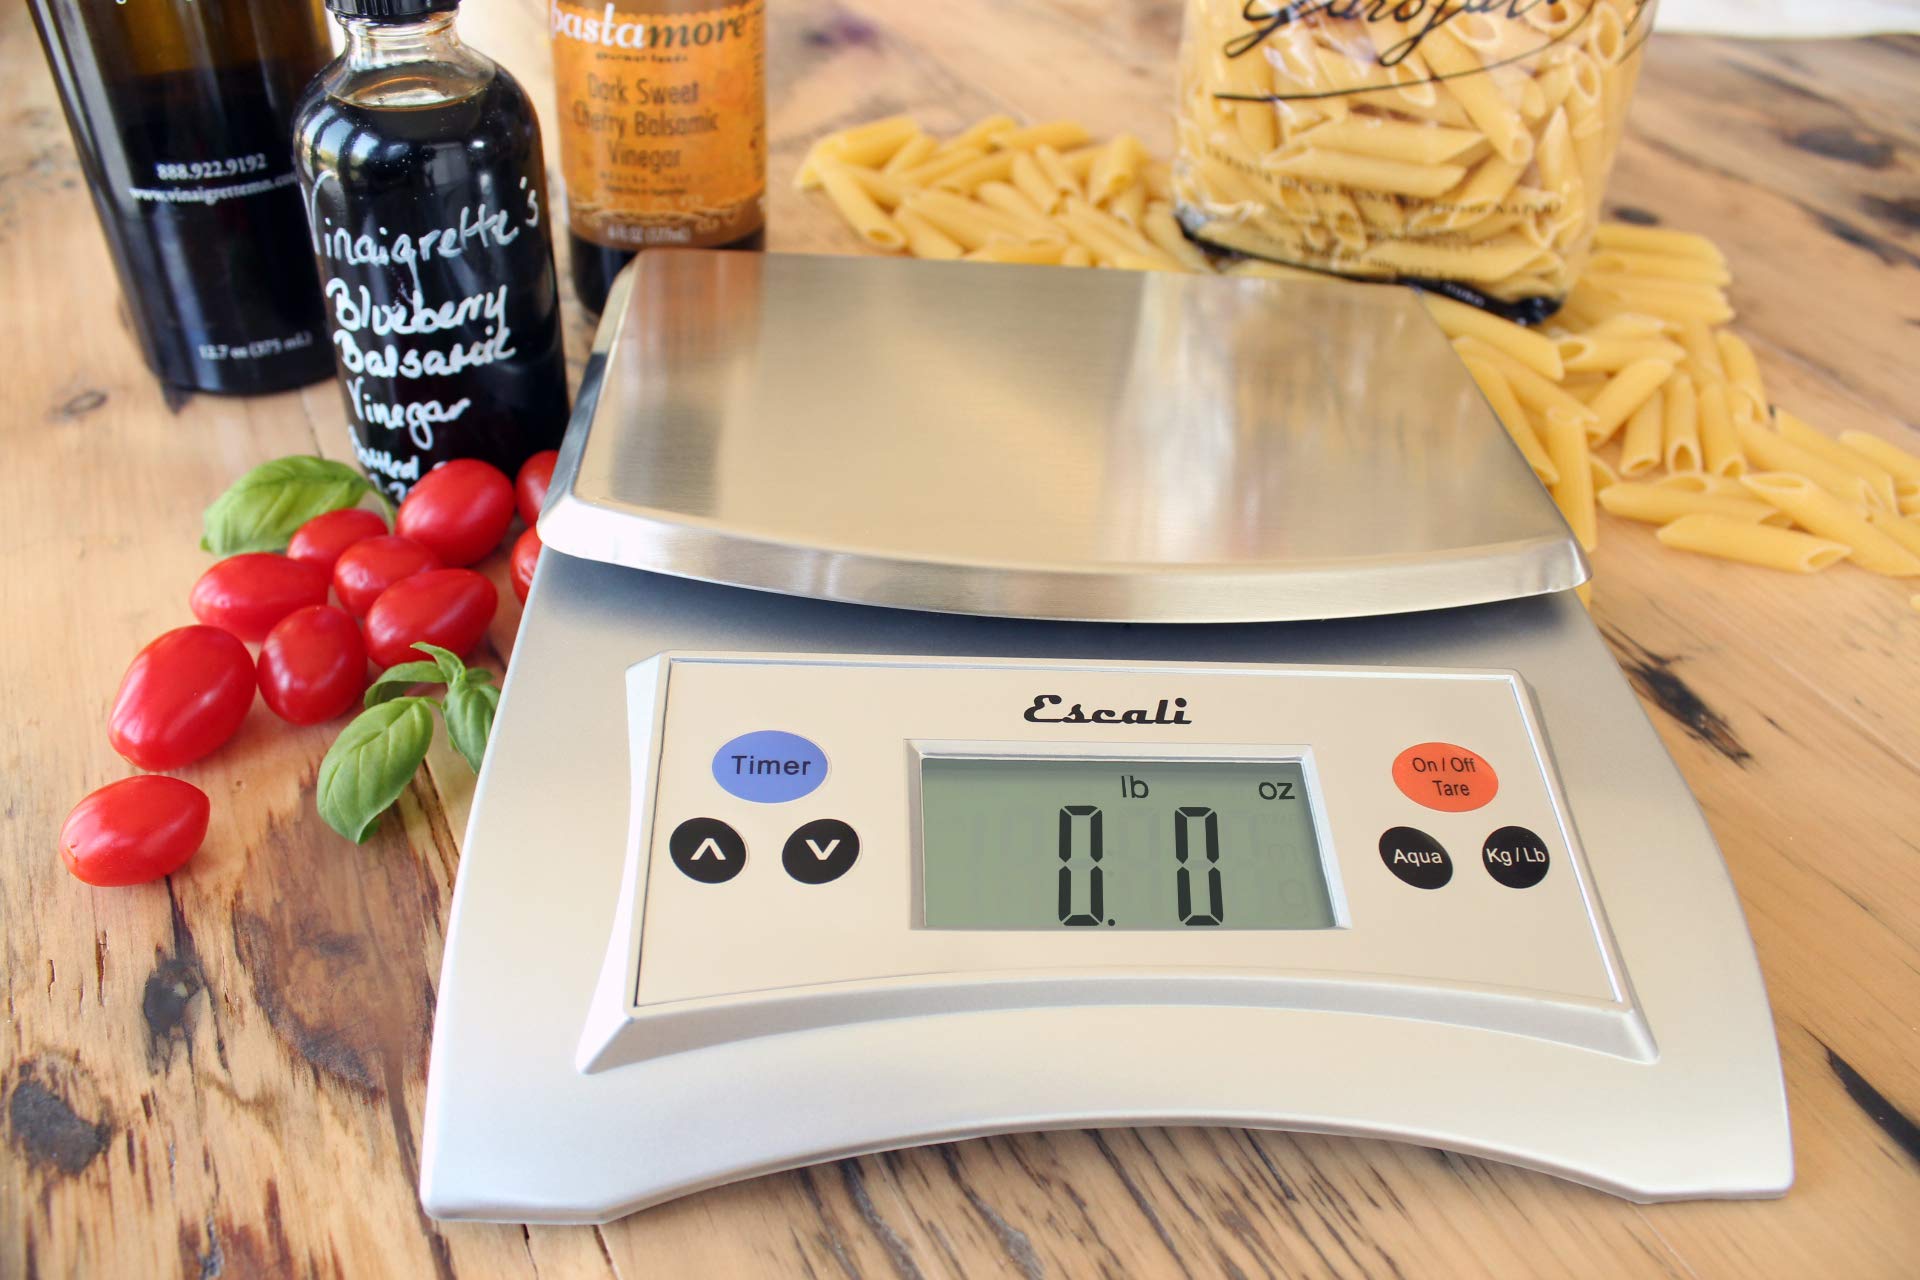 Escali Aqua A115S Scale for Liquids, Measures Specific Garvity, Removable Stainless Steel Platform, Built in Timer, Digital LCD Display, 11lb Capacity, Silver Grey